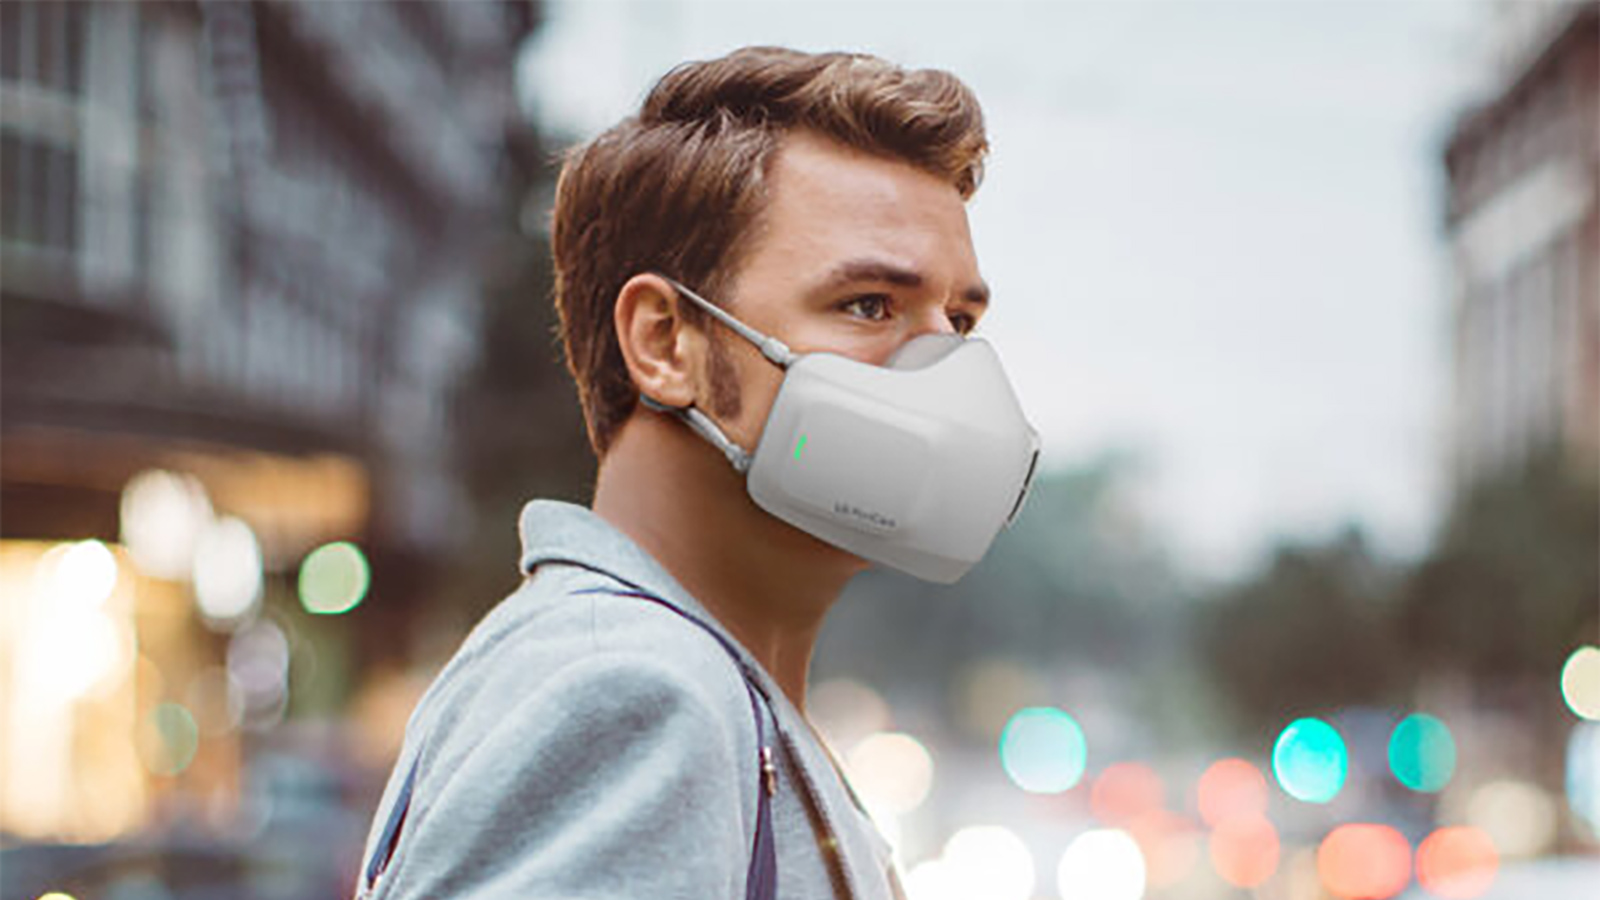 LG unveils new batterypowered face mask that doubles as an air